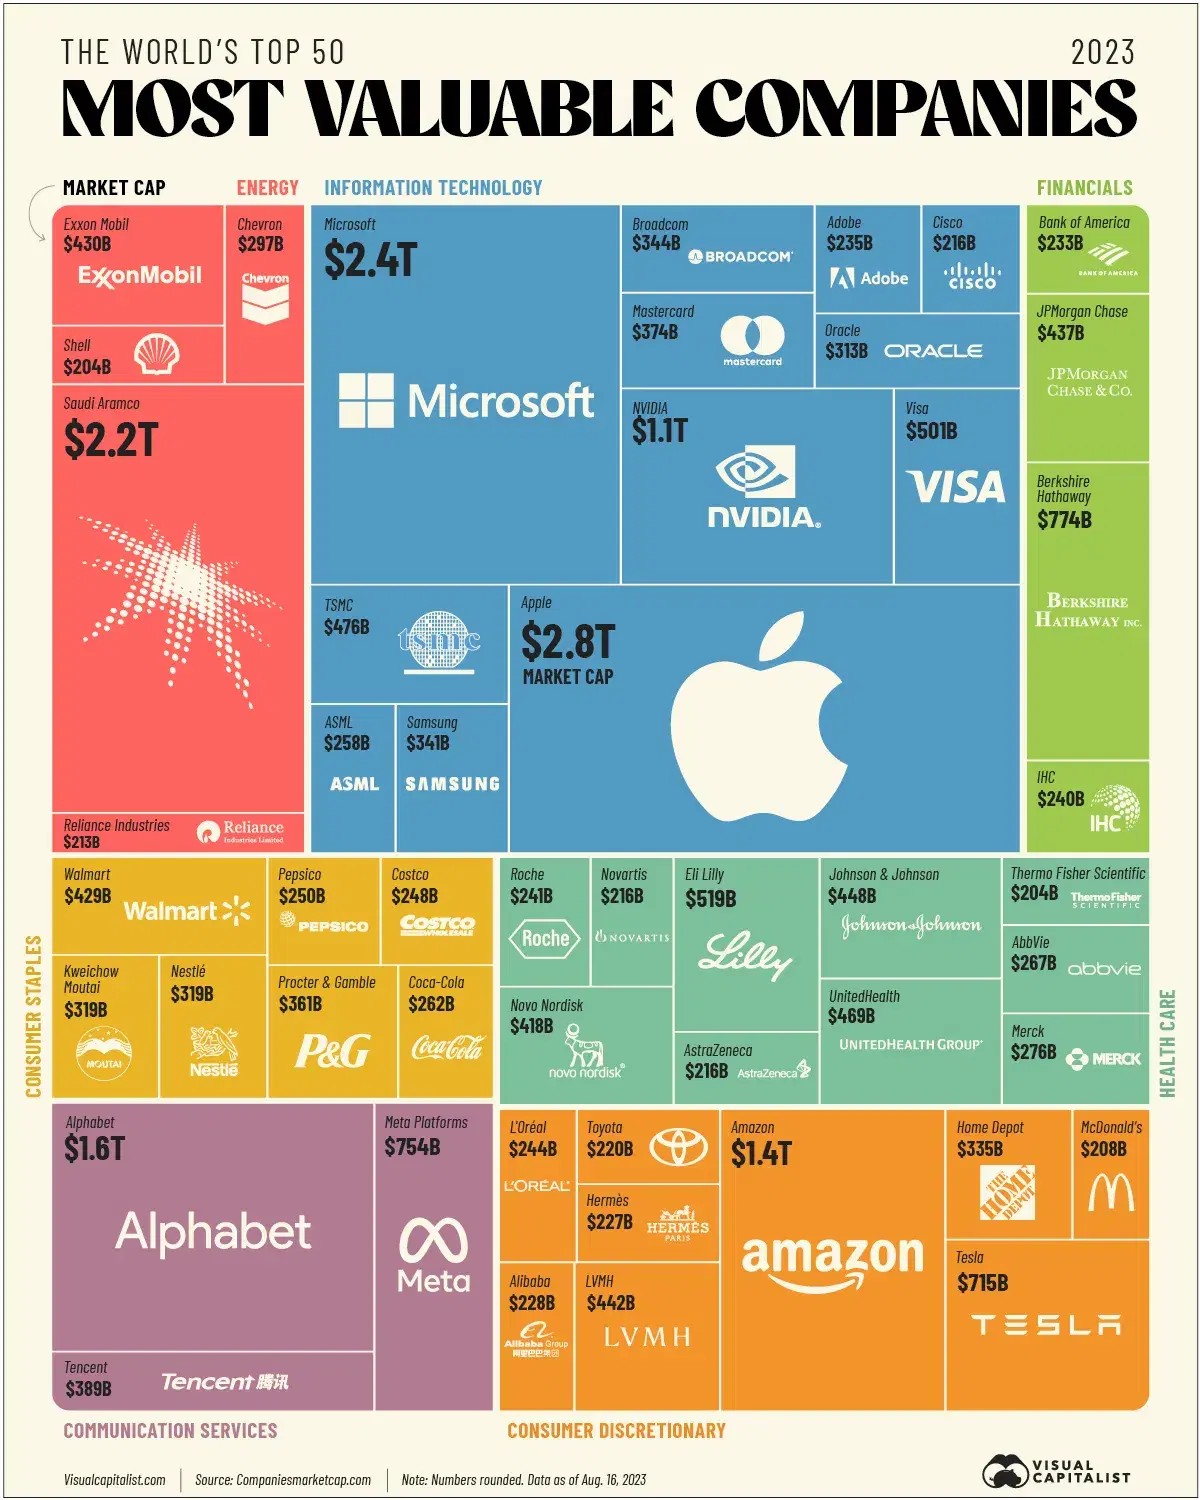 The 50 Most Valuable Companies in the World in 2023